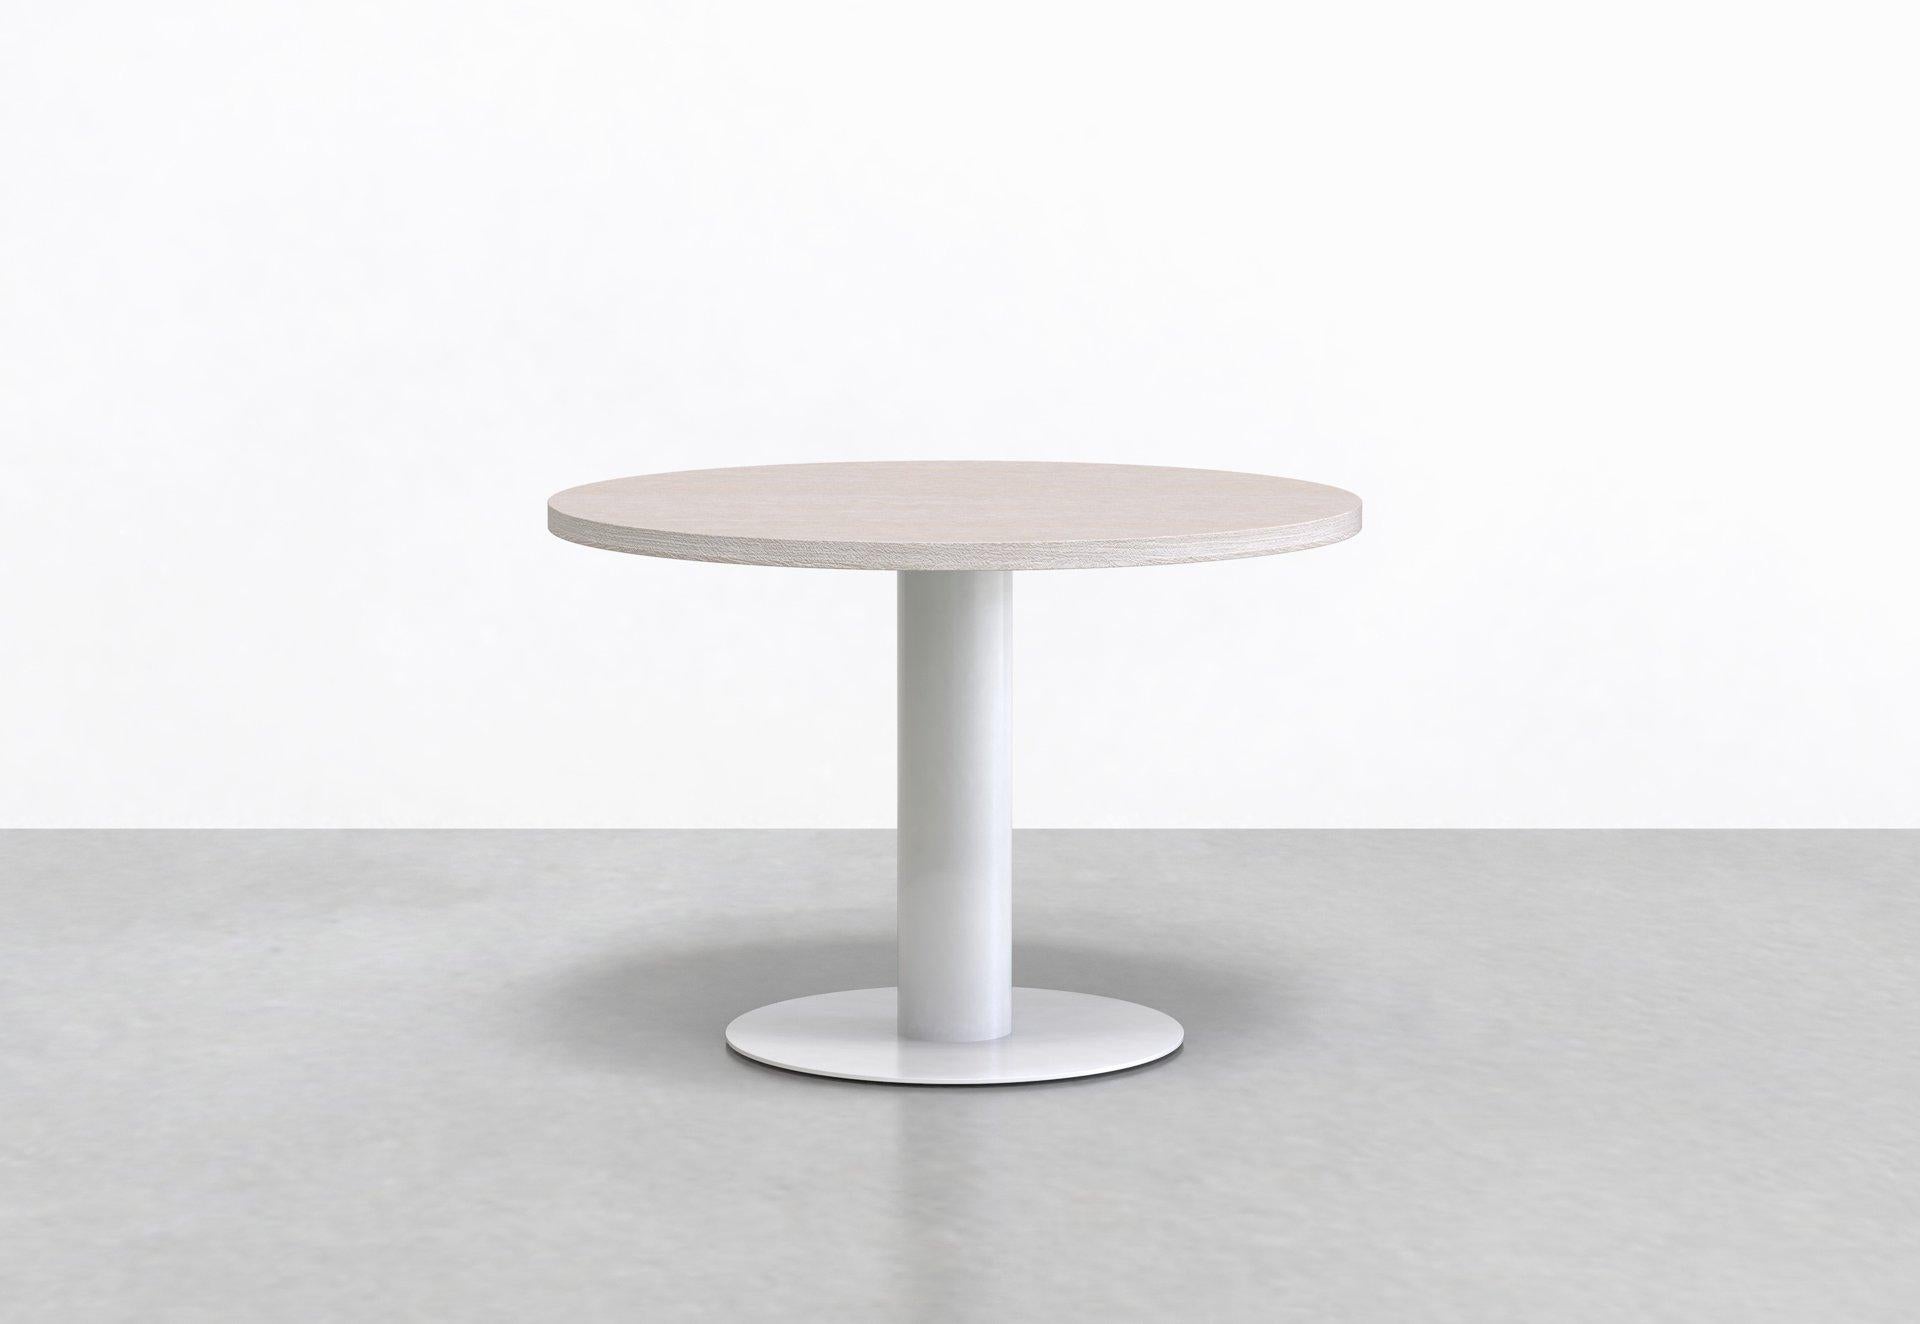 The Mast table is inspired by the form of a modern cafe table and translates it for any space. A great solution for huddle rooms or dining areas, the Mast table's round pedestal base tucks into smaller areas with ease. 